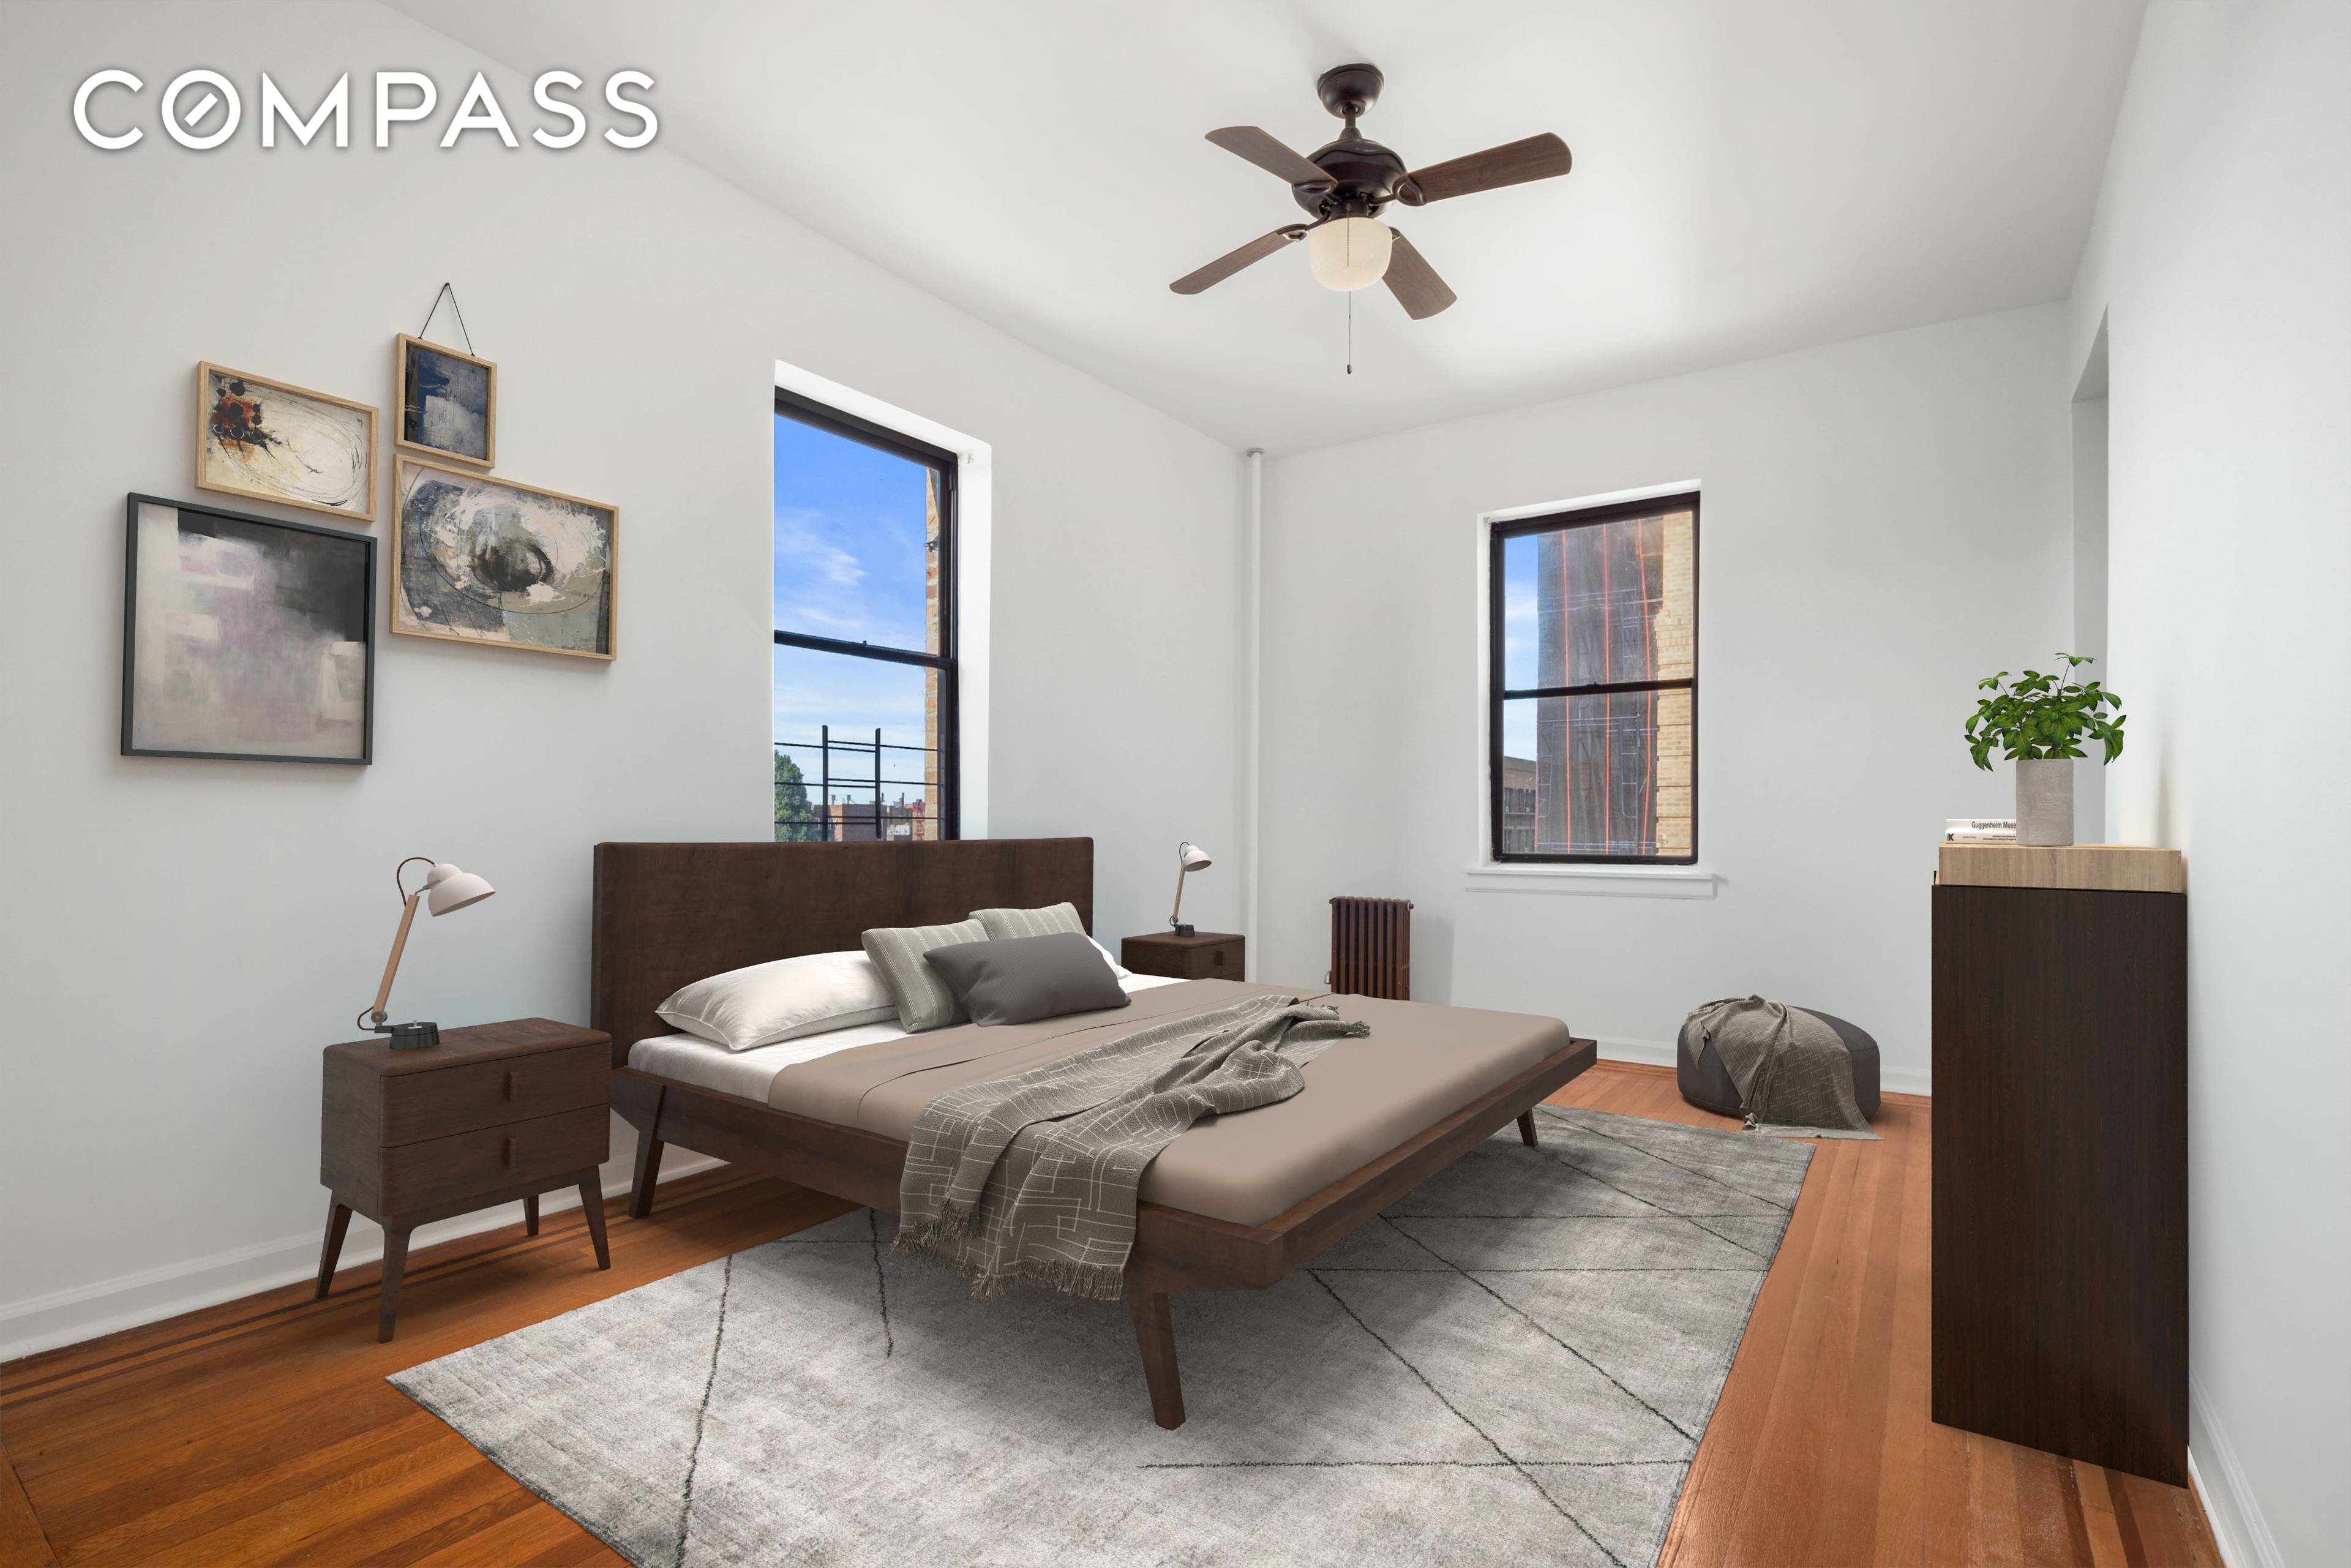 This corner 2 bedroom apartment offers striking views of gorgeous sunsets over Manhattan from the Western facing windows in the living room, bedroom, and eat in kitchen.